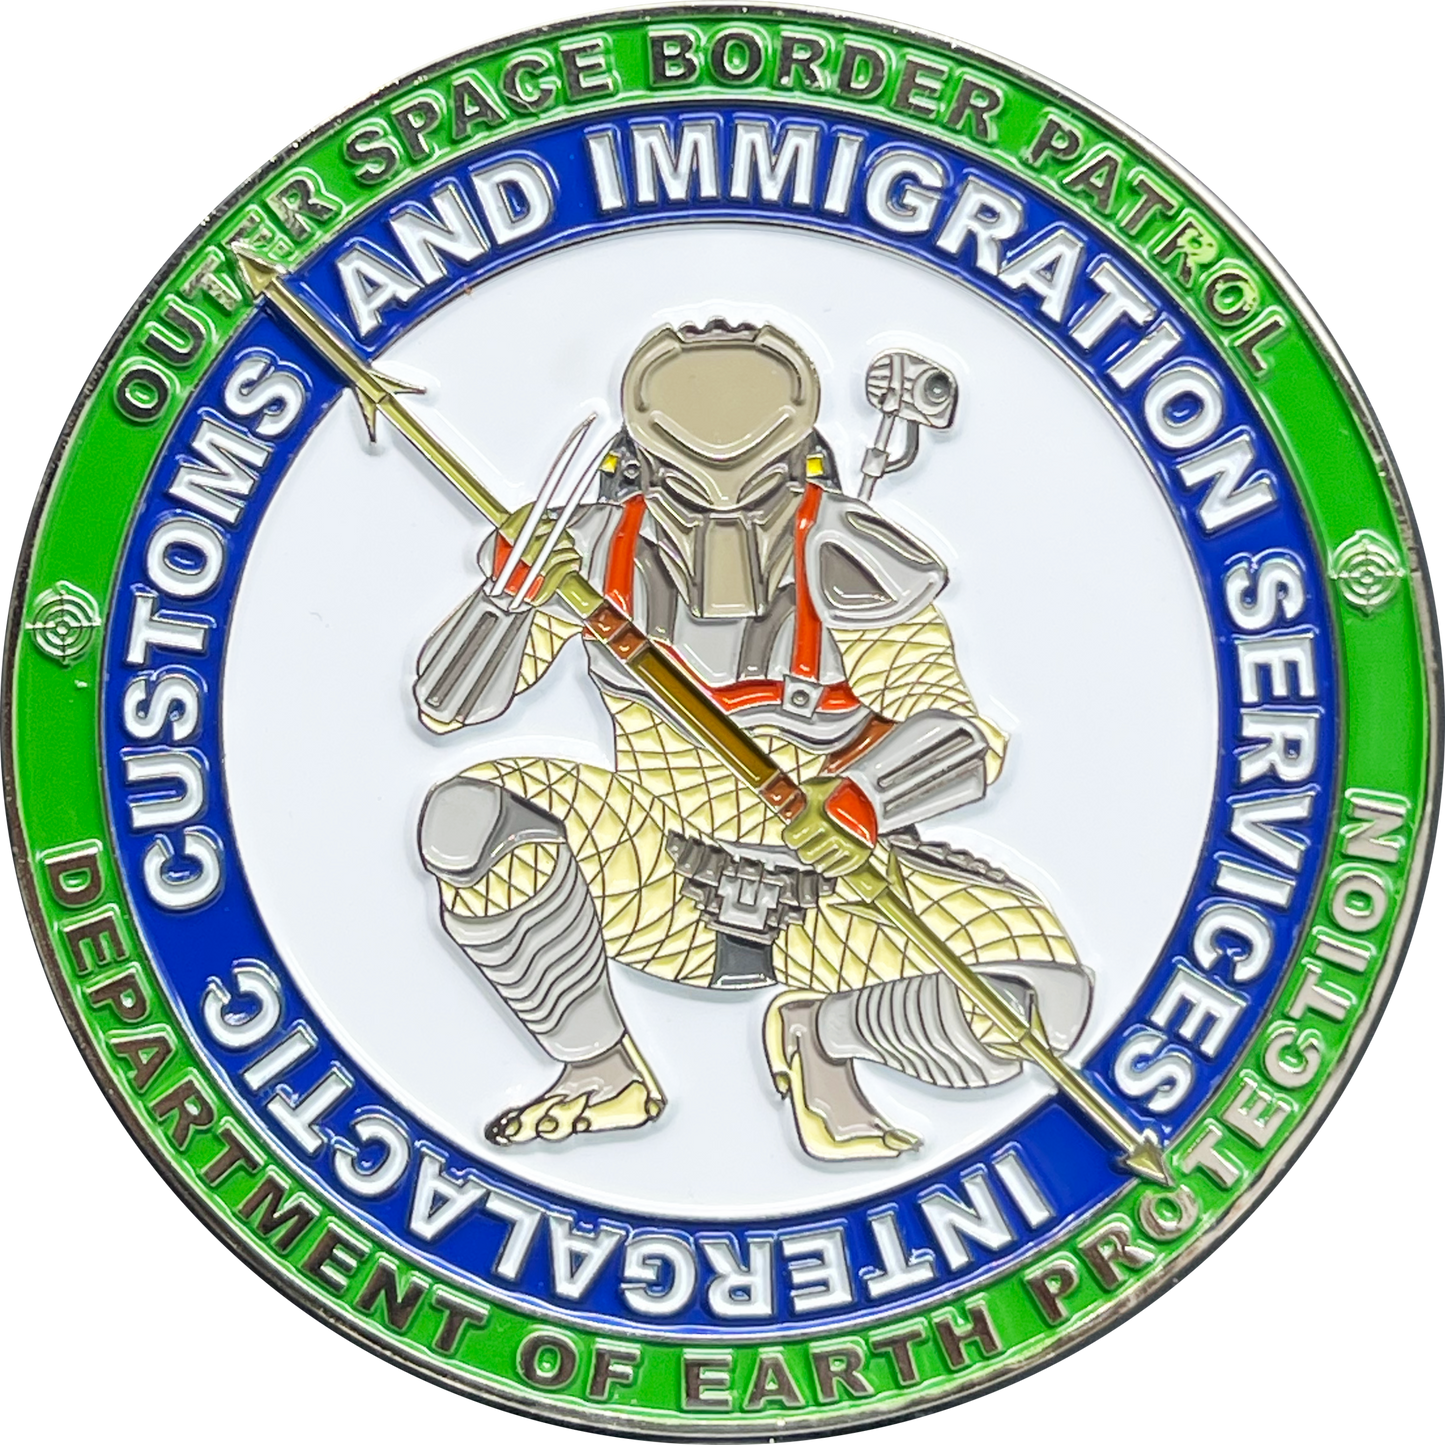 BL14-009 Illegal Space Aliens Predator Outer Space Border Patrol Intergalactic Customs and Immigration Challenge Coin